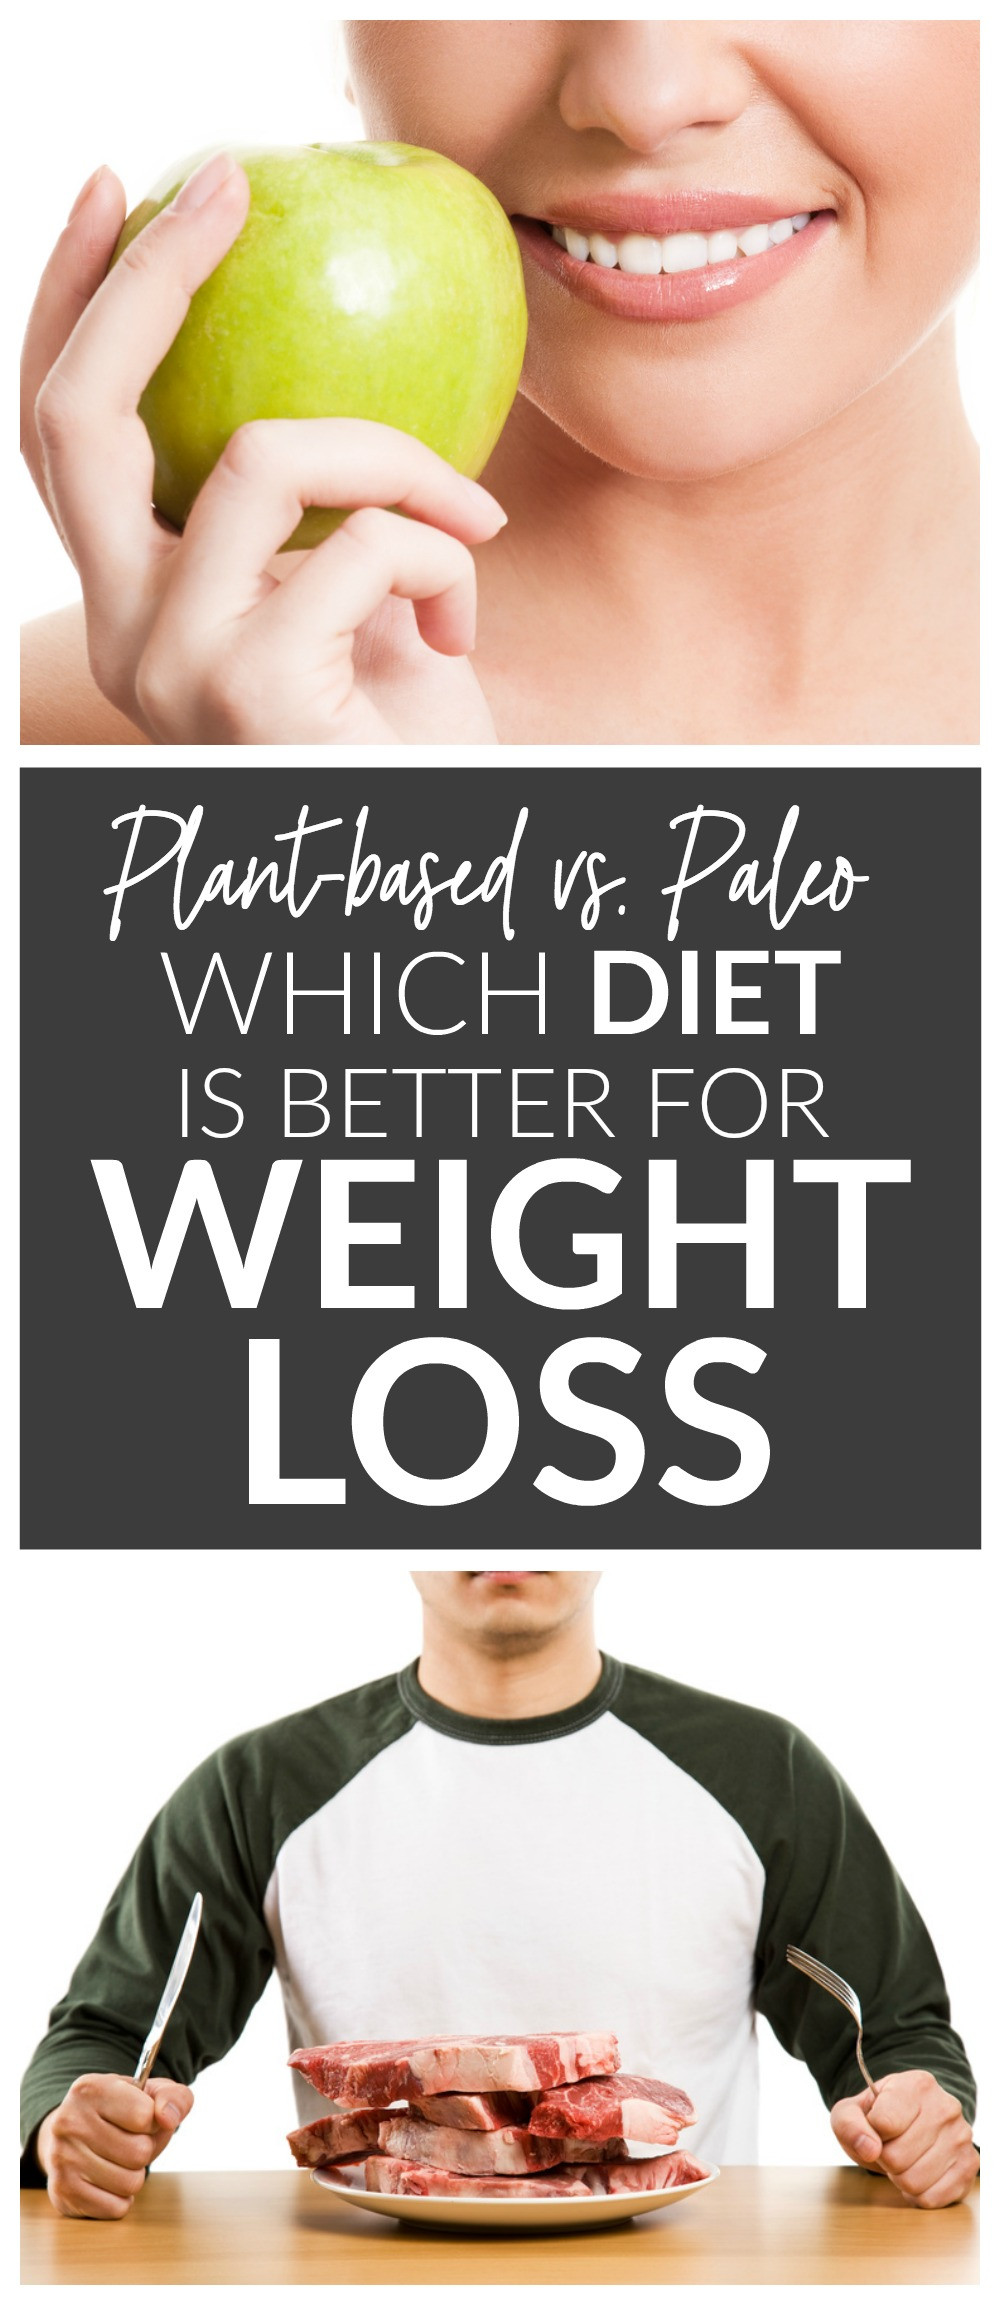 Plant Based Diet For Weight Loss
 Do Plant Based Diets Help With Weight Loss